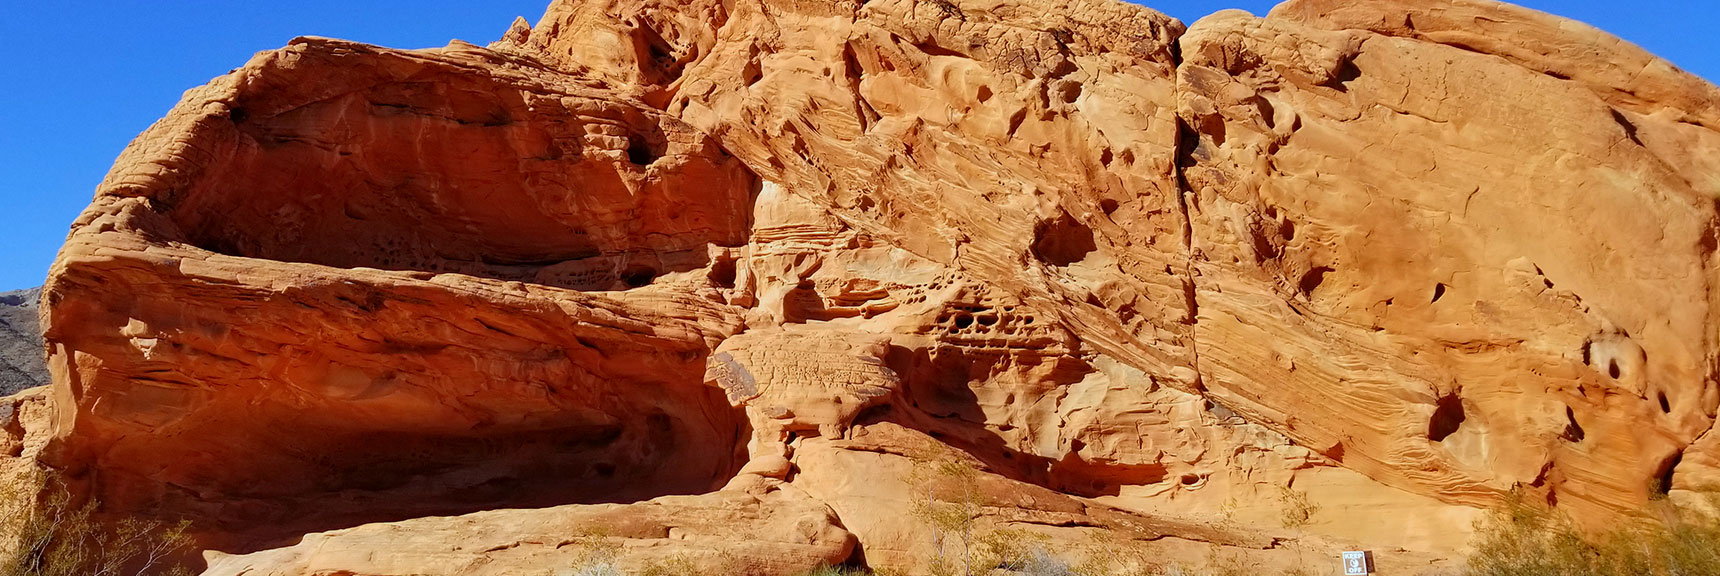 Rock Caverns Behind Arch Rock in Valley of Fire State Park, Nevada